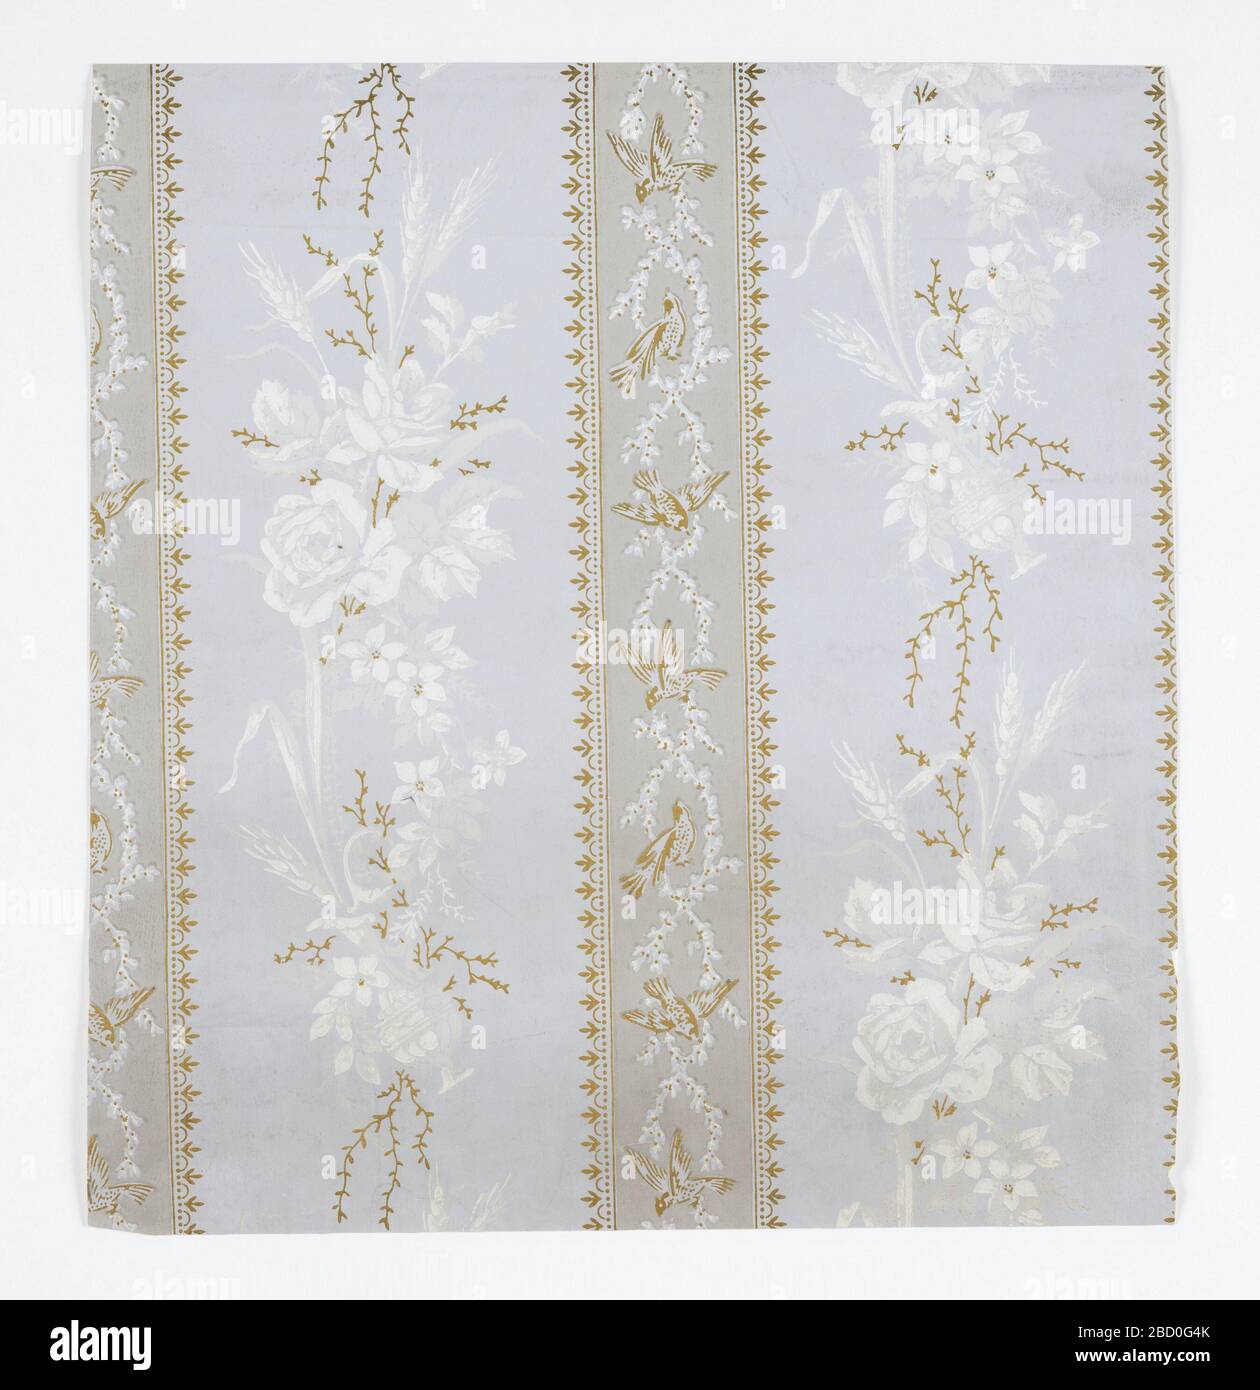 Sidewall. Neoclassical pattern of columns of flower bouquets with roses and ears of wheat alternating with vertical ribbons with simple lace-like borders; vertical pattern in ribbon of songbirds alternating in three poses on entwined white wreaths; interiors of ribbons are grey with gold h Sidewall Stock Photo